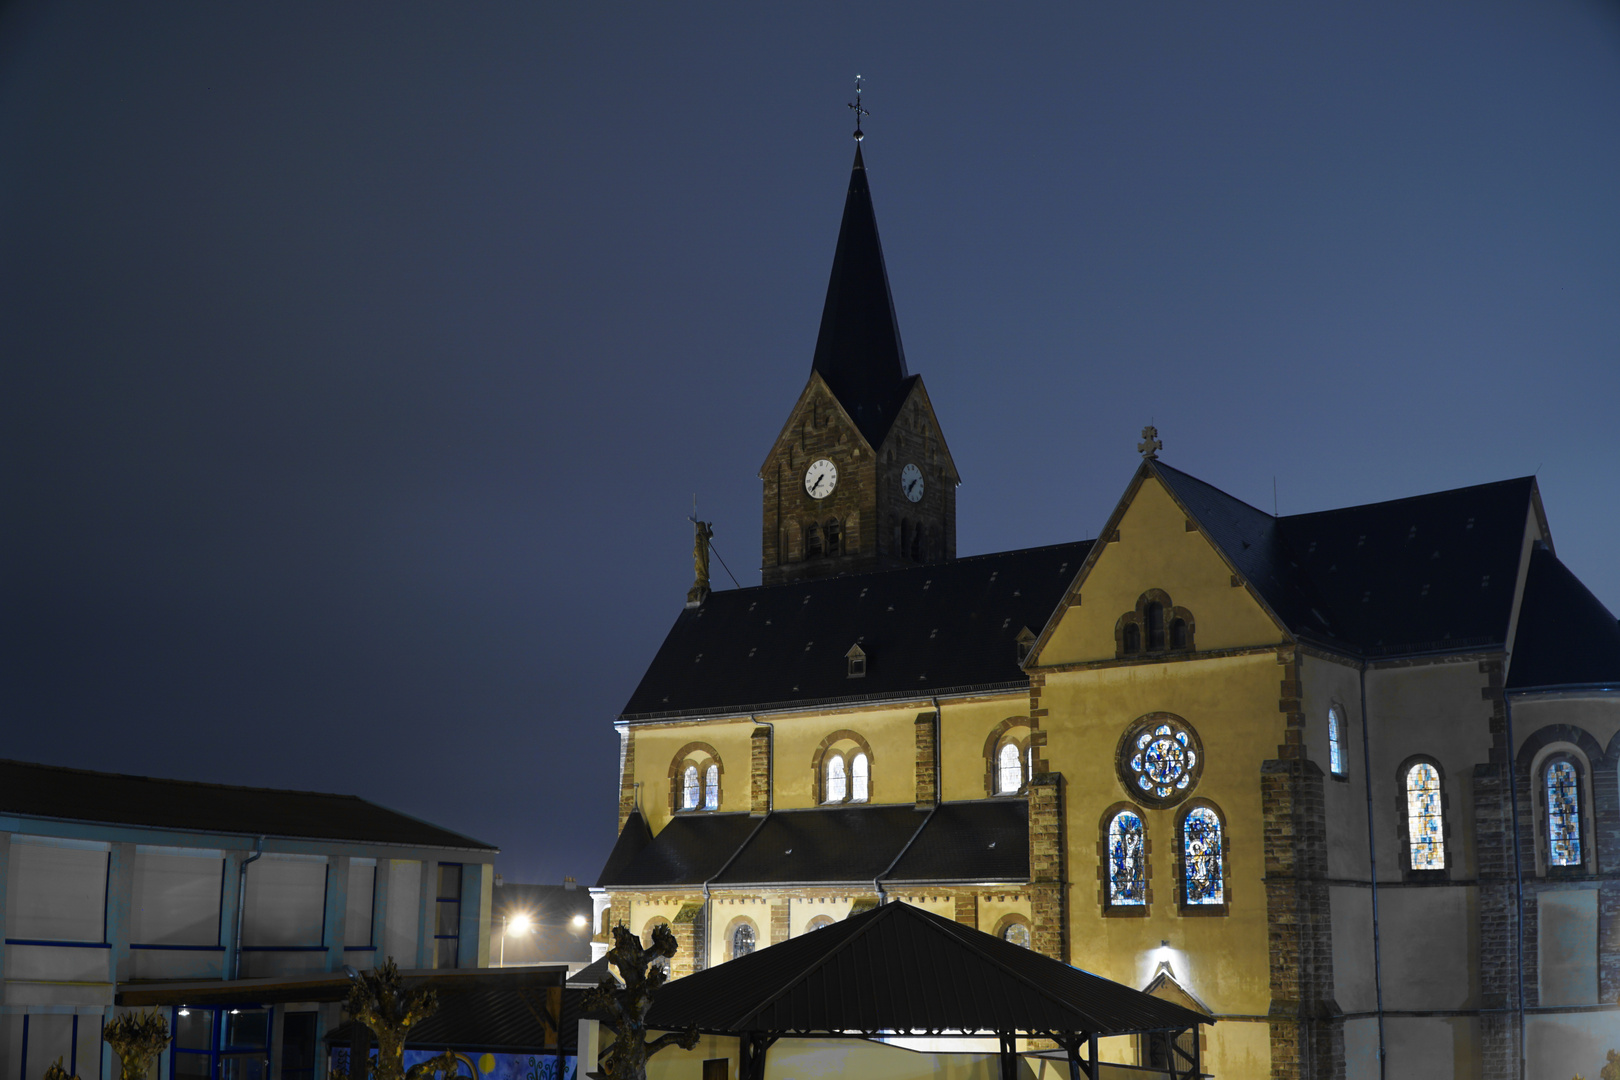 Church at night in France